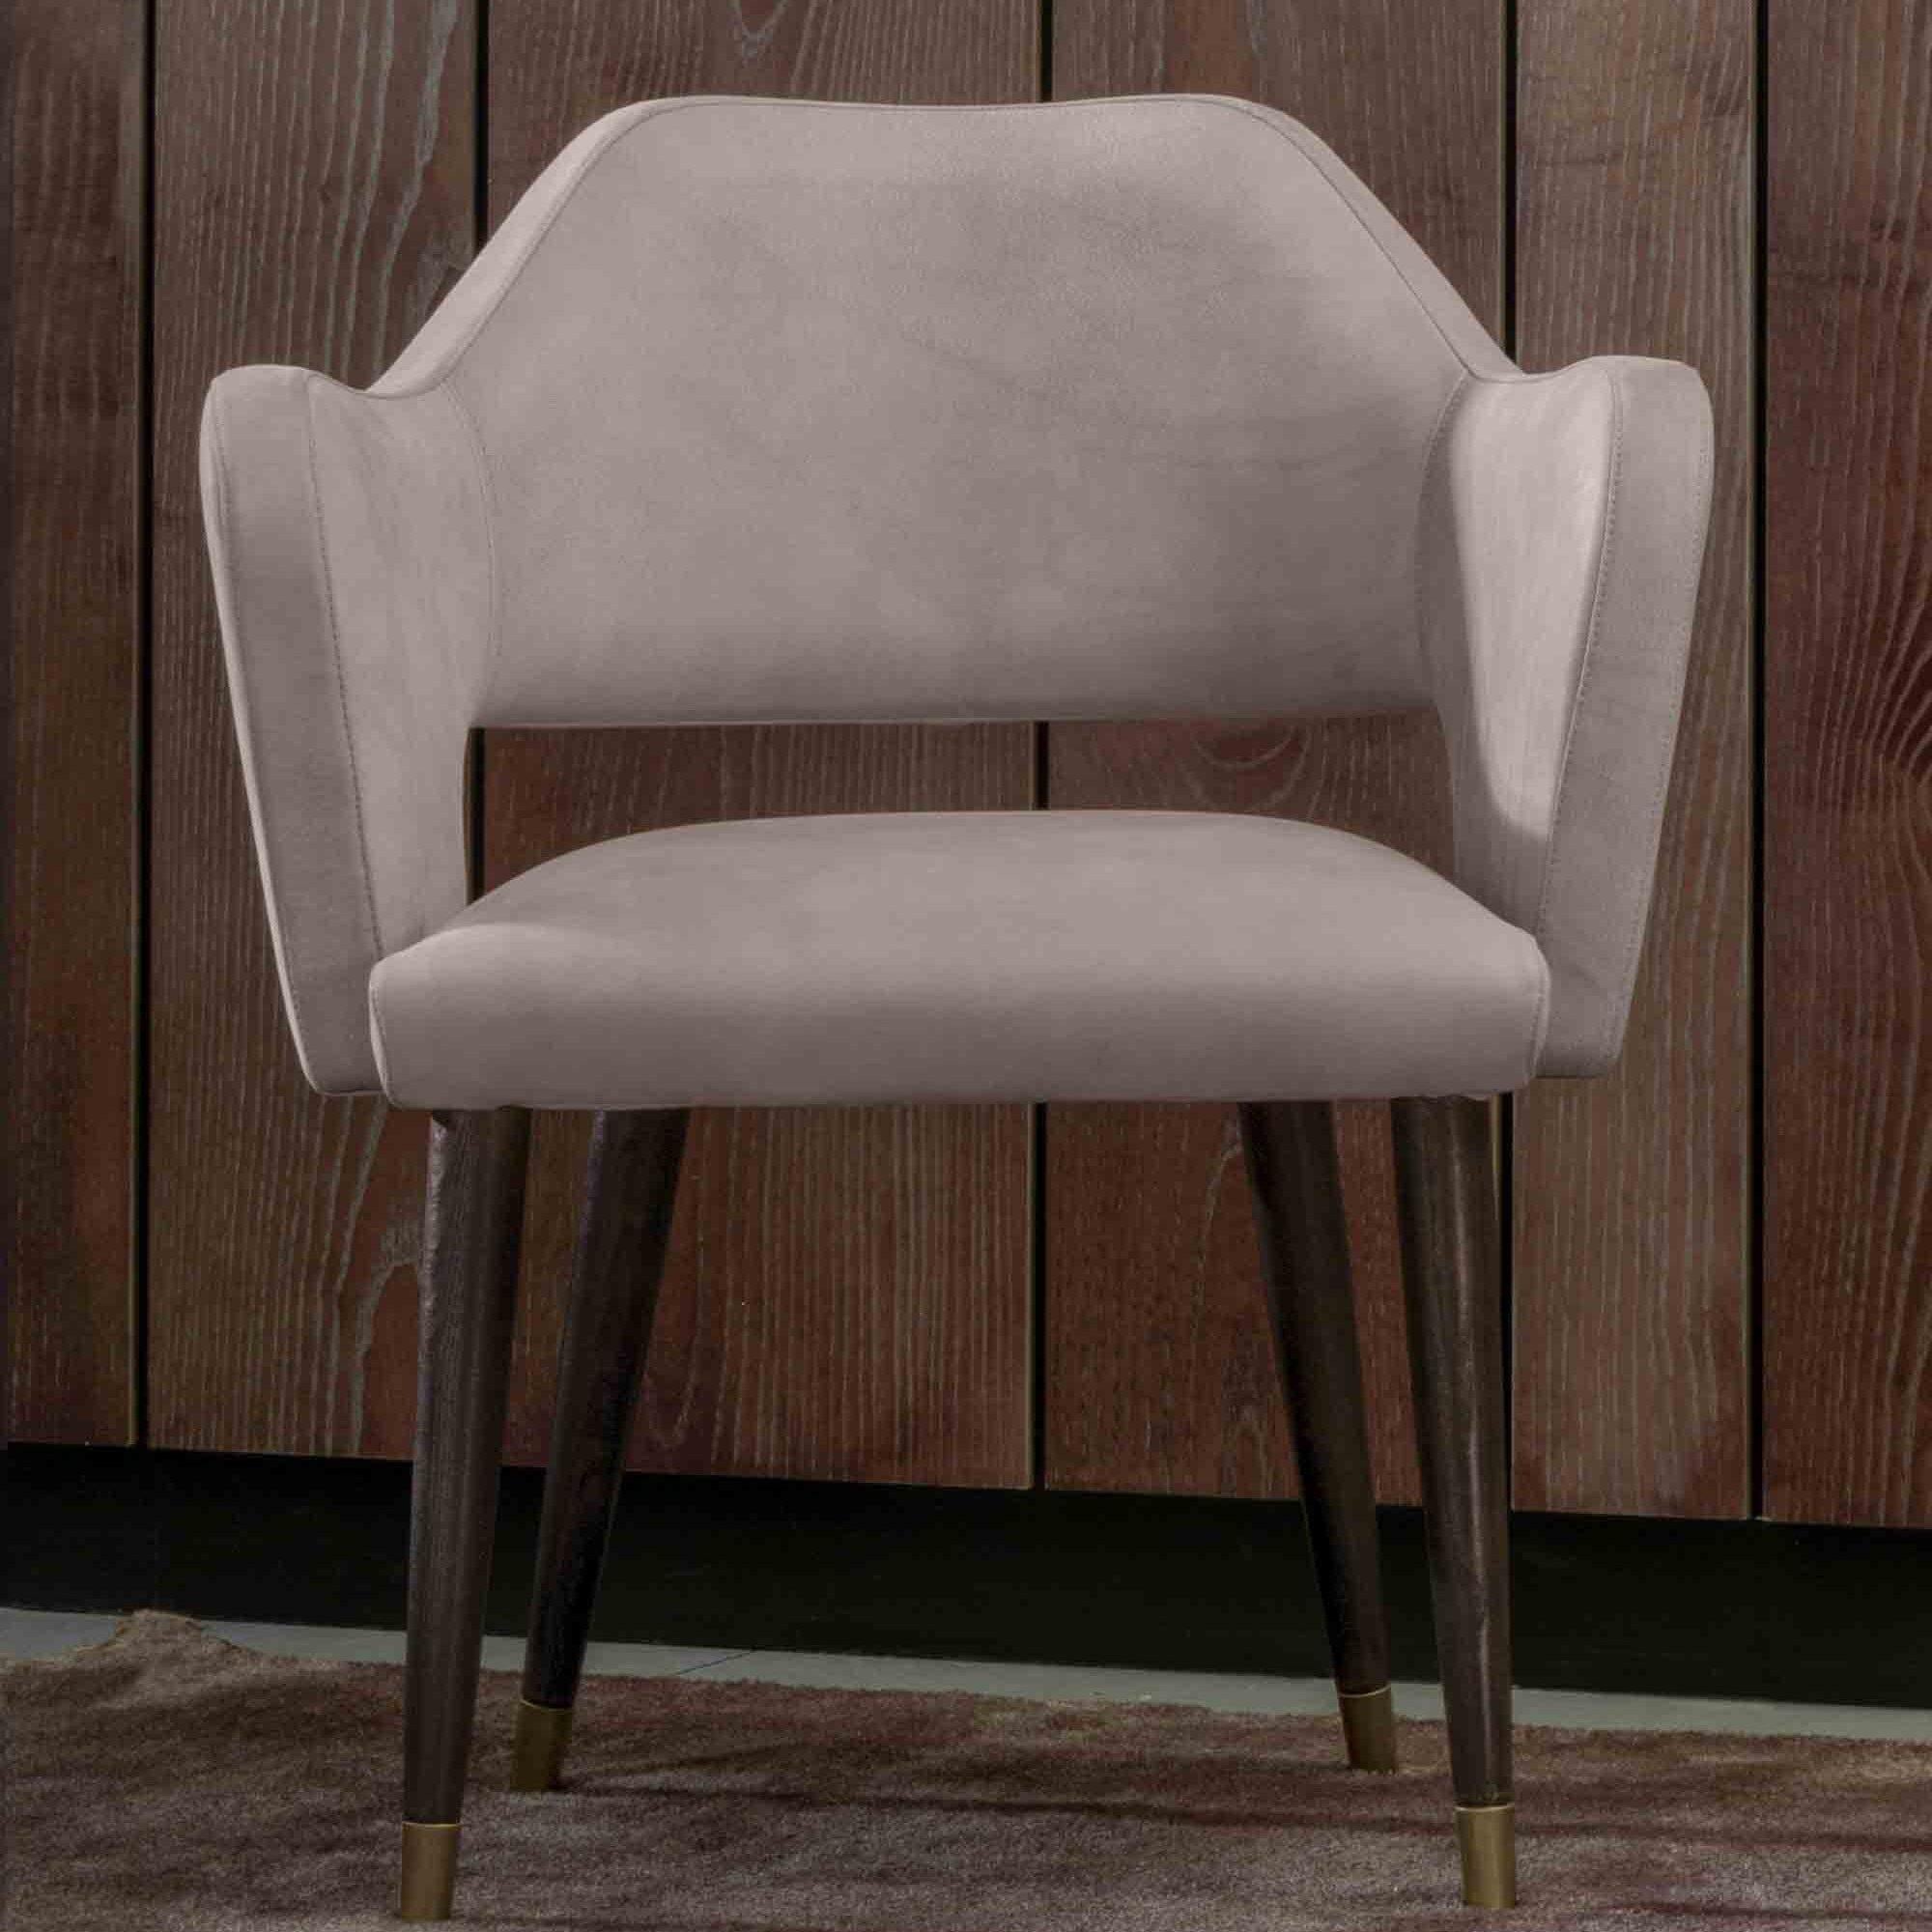 The Ines Dining Chair with Arms has mid-century charm, exquisite details and modern sophistication make this chair an elegant addition to a modern home, where it can be used as an accent piece in an entryway, a chair in an office, or in a home.